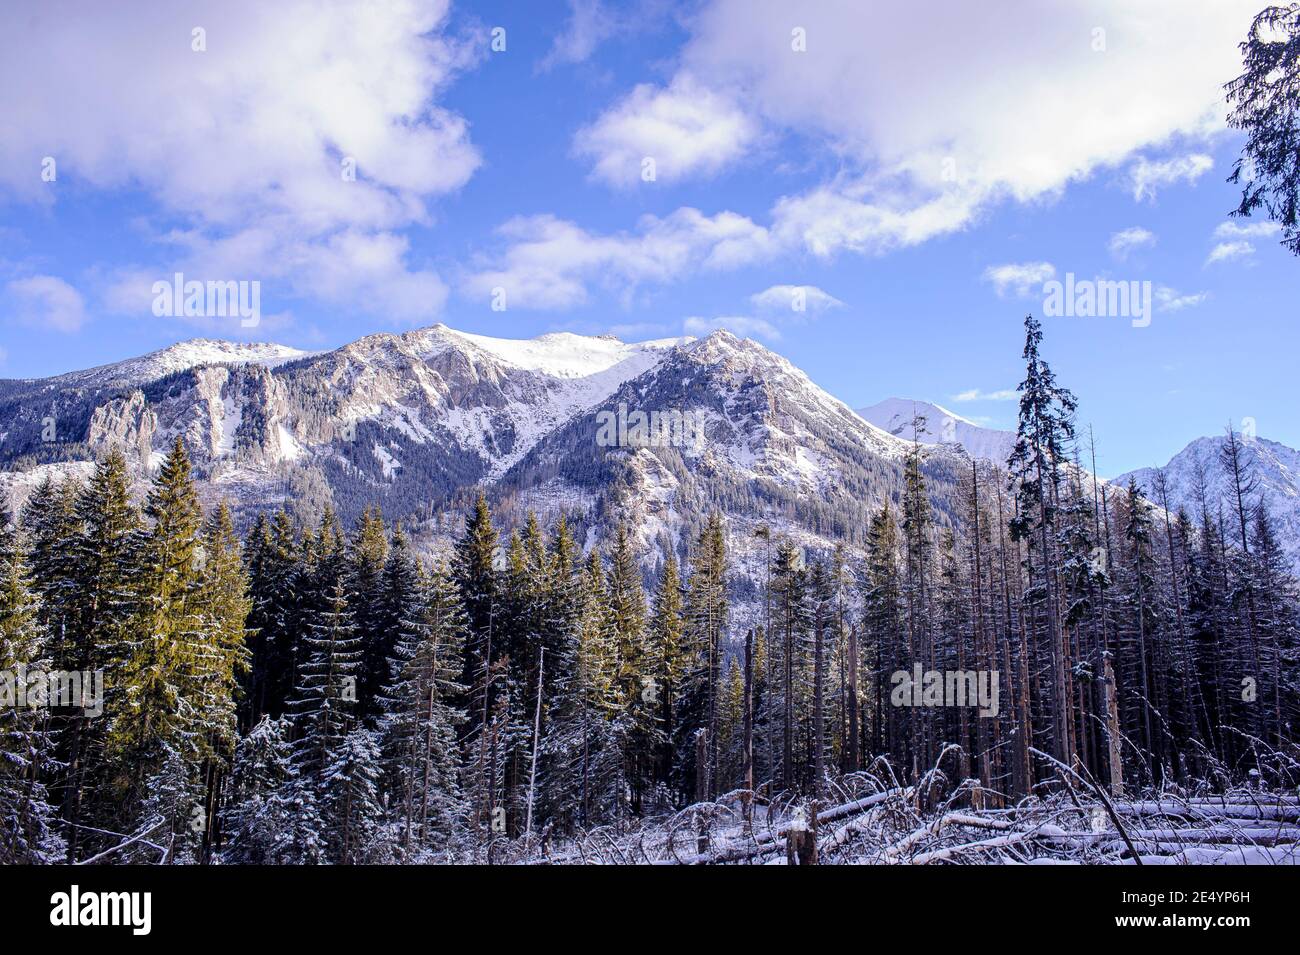 mountainous landscape in the Tatras in Poland - Snow-covered mountain ranges in the mountains in southern Poland. In the foreground, a pine forest. Stock Photo